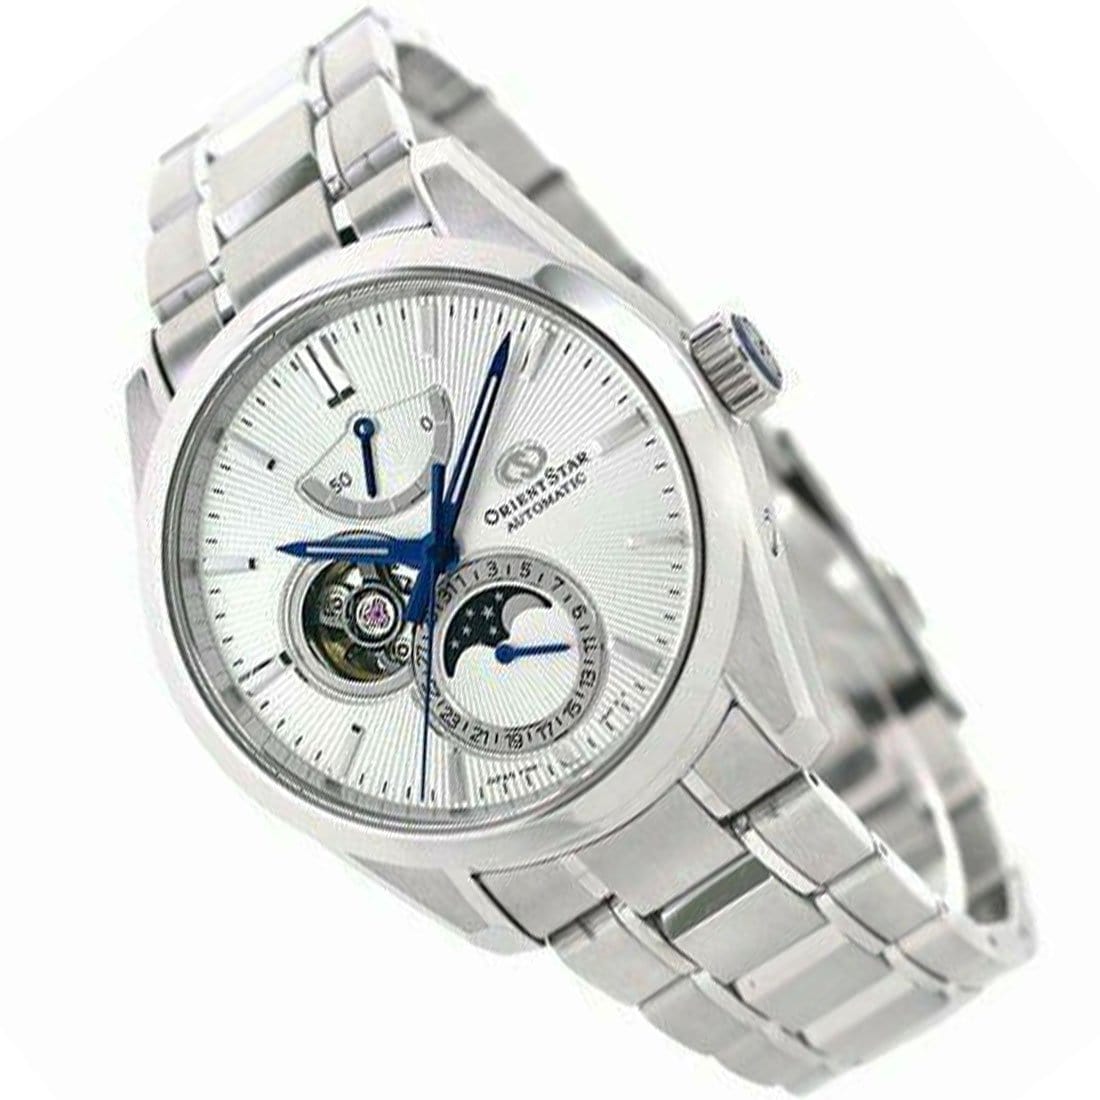 RE-AY0002S00B RE-AY0002S Orient Star Moon Phase Classic Automatic Open Heart Watch